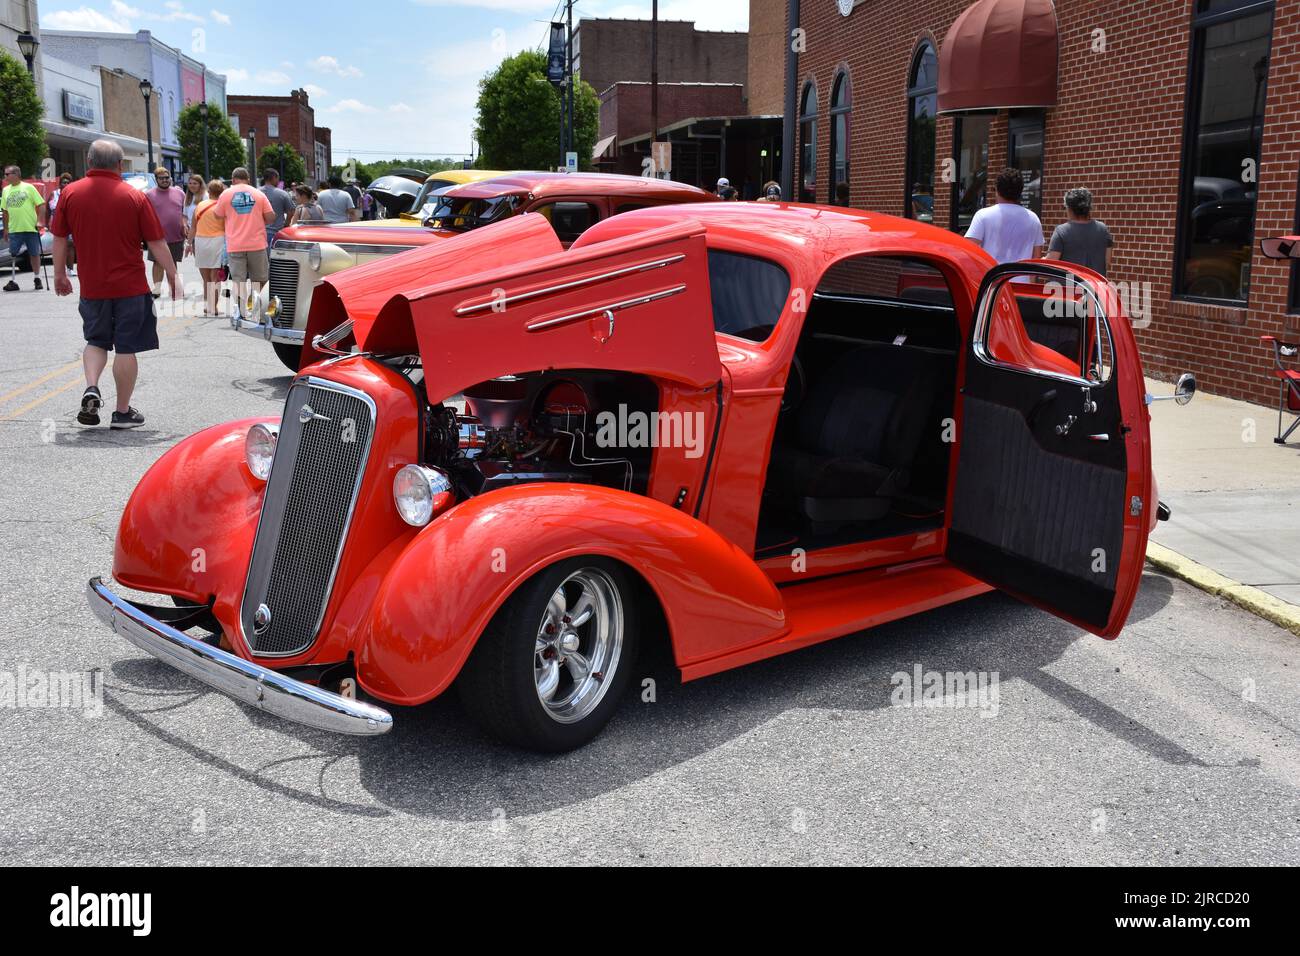 A 1935 Chevrolet Master Deluxe Coupe on display at a car show. Stock Photo